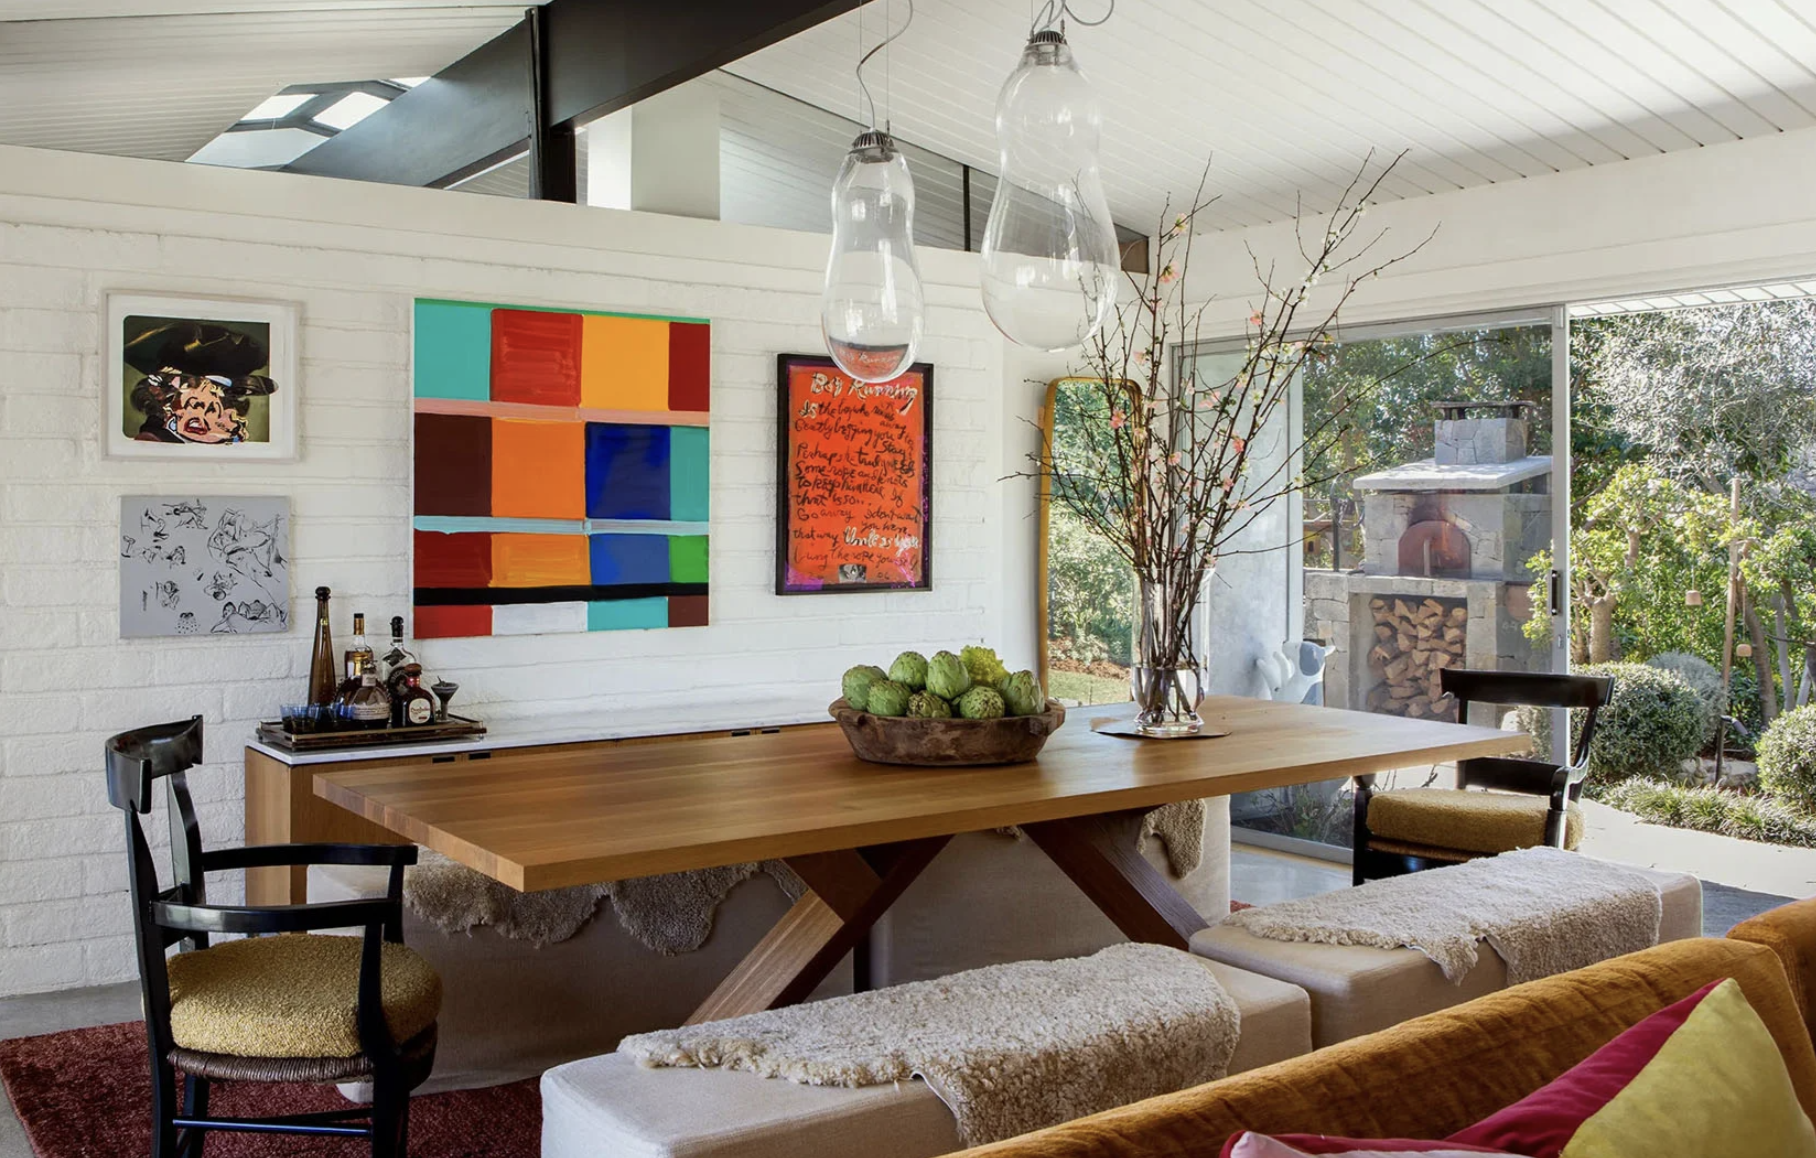 Add Mid-Century Modern Interior Design to Your Home with These Colors